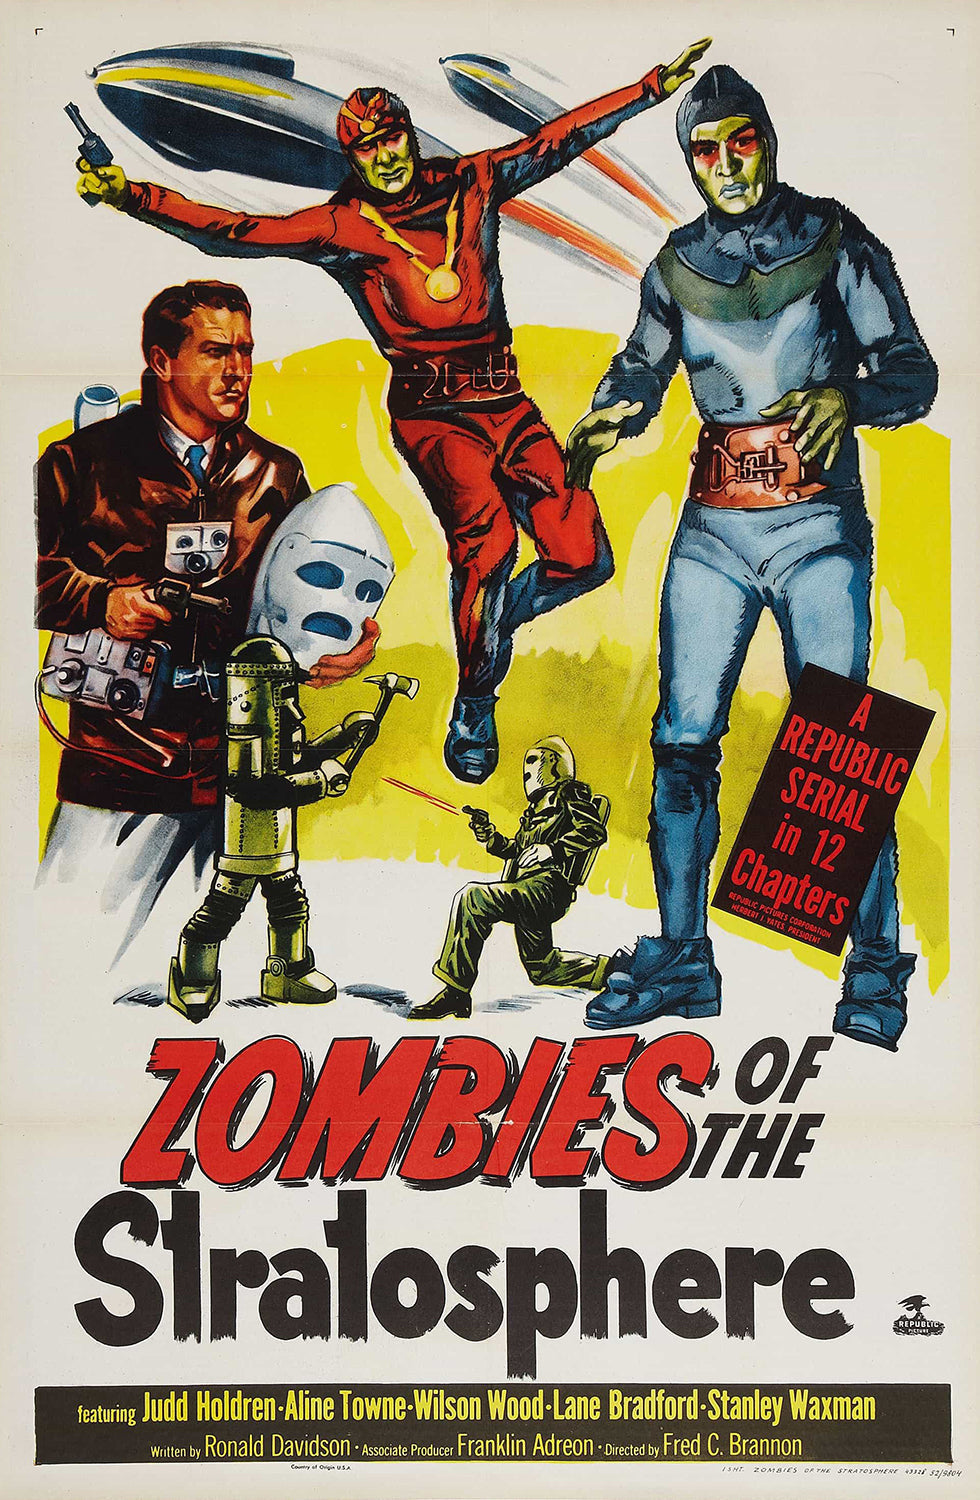 Zombies of The Stratosphere (1952) Vintage Sci-Fi Movie Poster